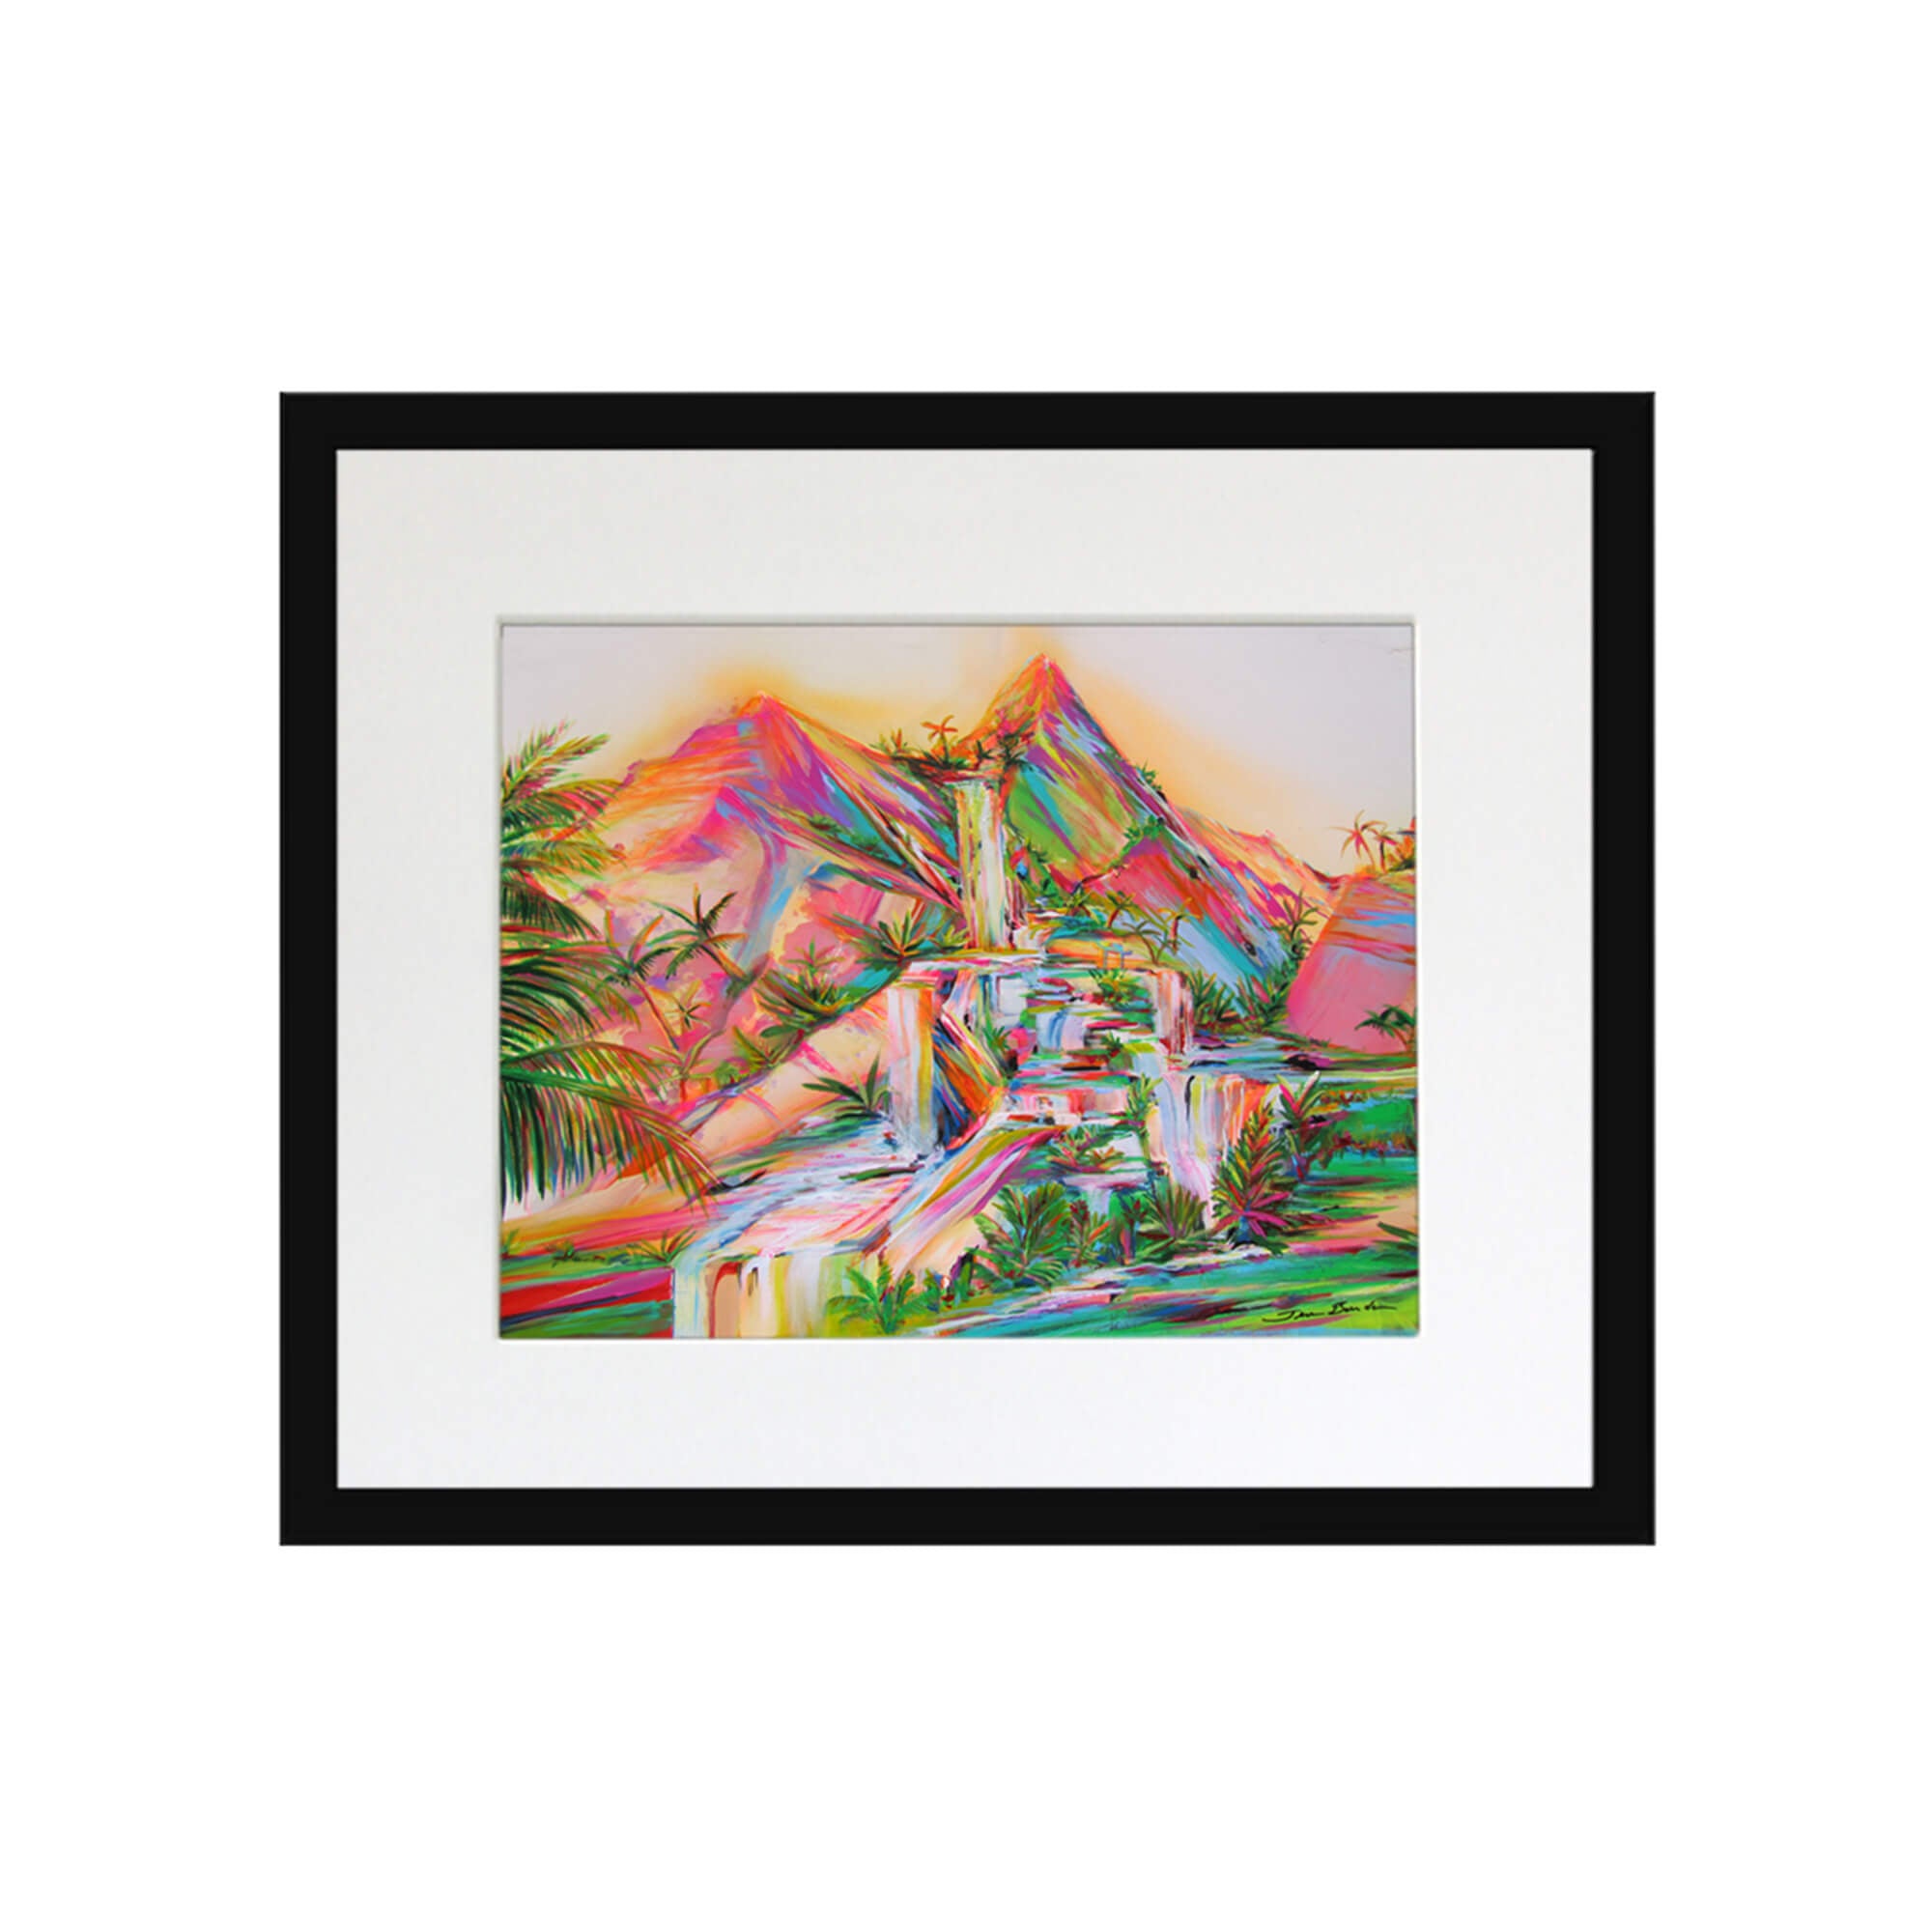 Vibrant pink and green colored mountain with flowing water by Hawaii artist Jess Burda